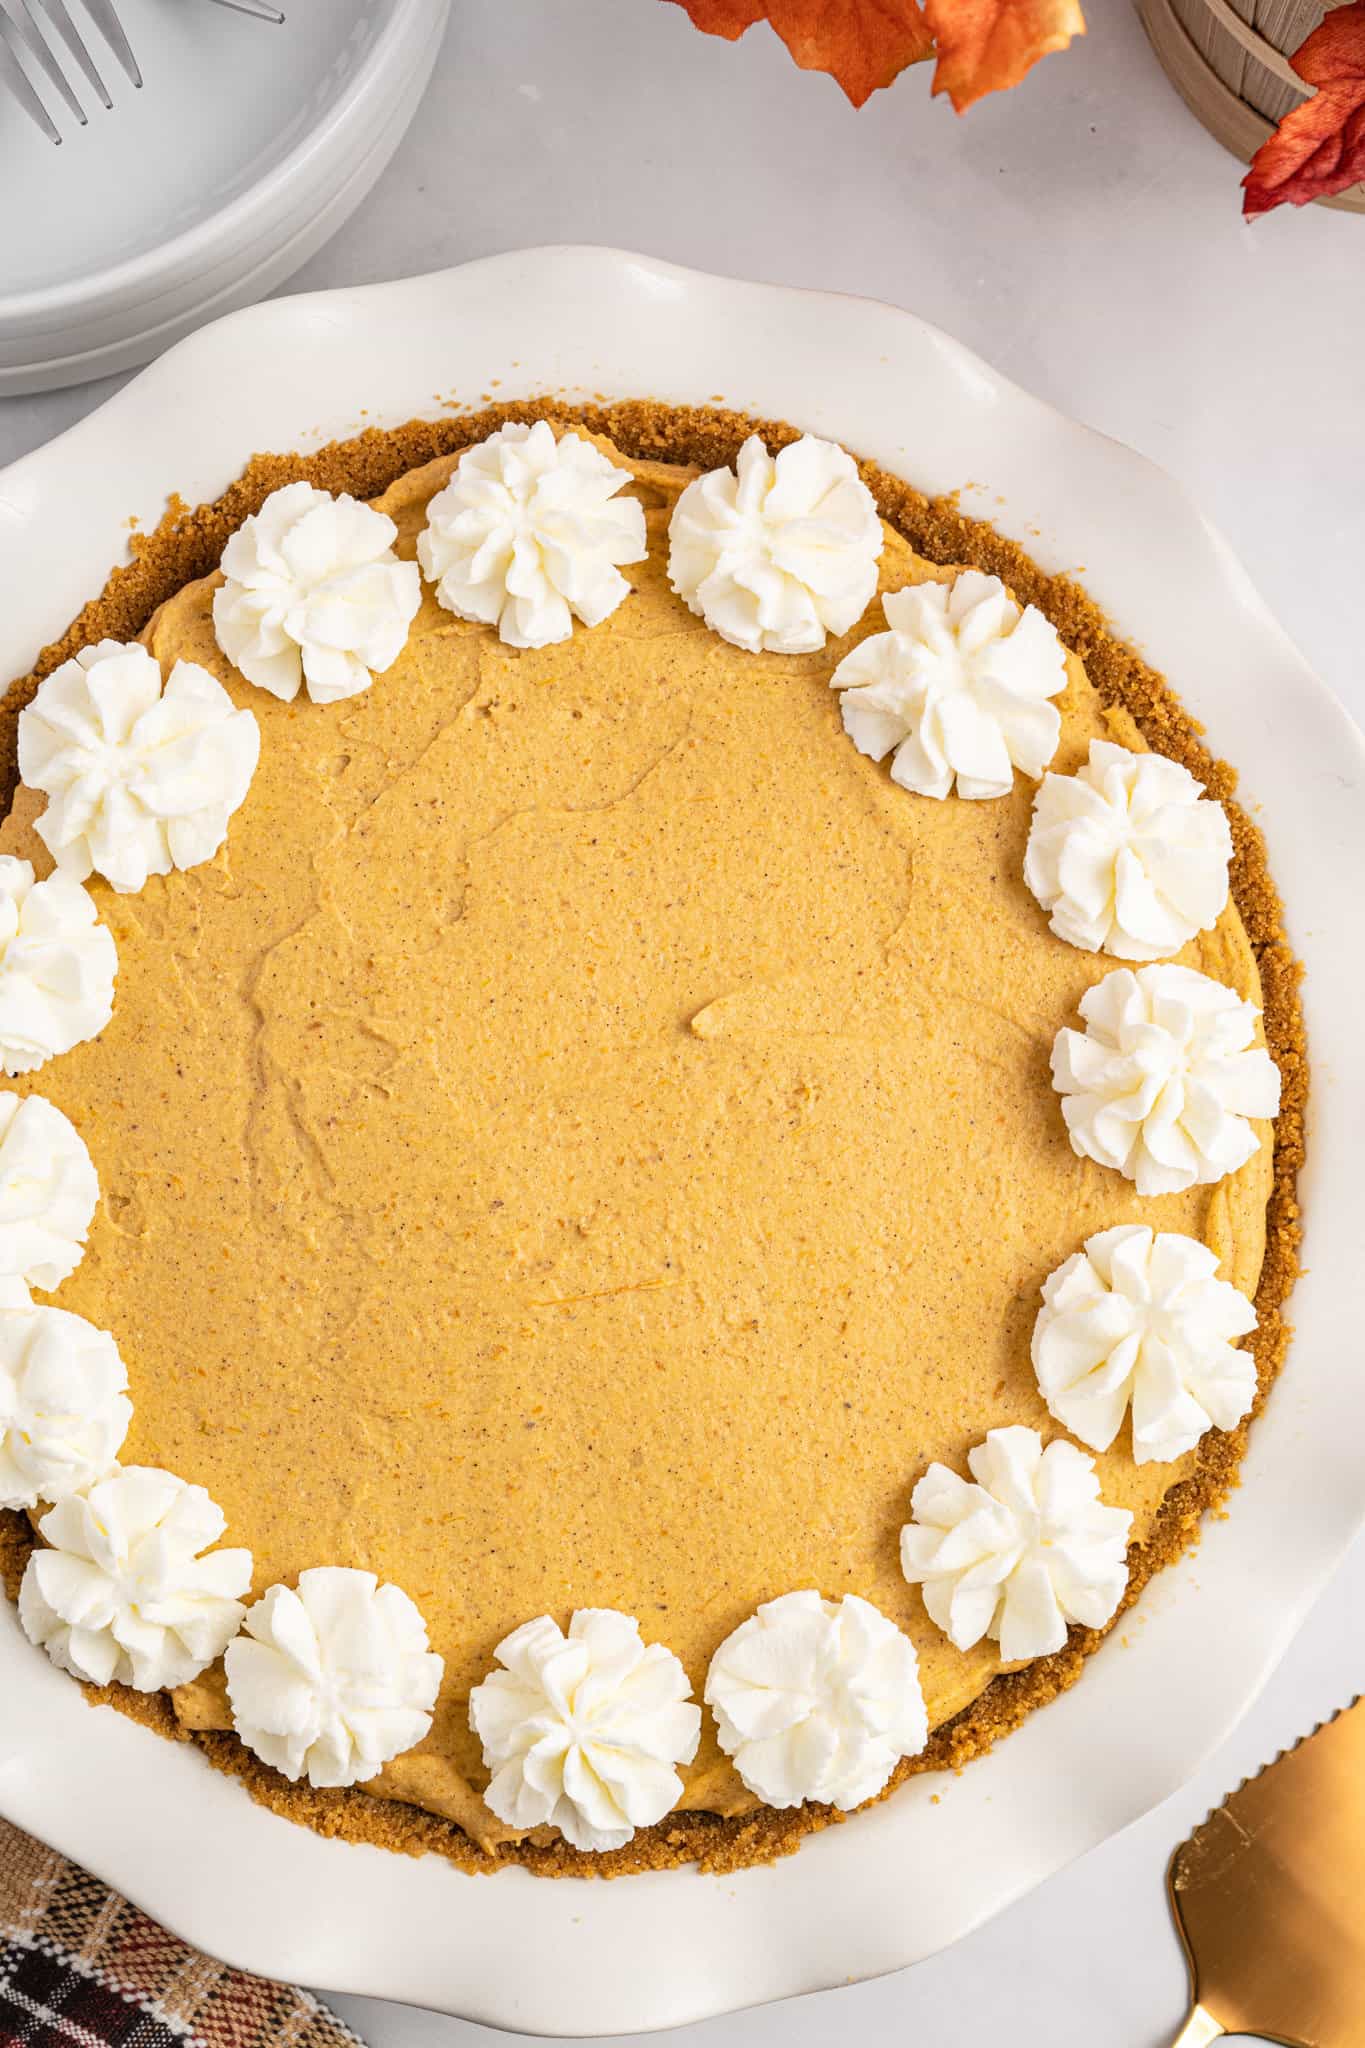 No Bake Pumpkin Pie is an easy fall dessert recipe with a ginger snap cookie crust and a creamy filling made with instant vanilla pudding mix, whipping cream and pumpkin puree.